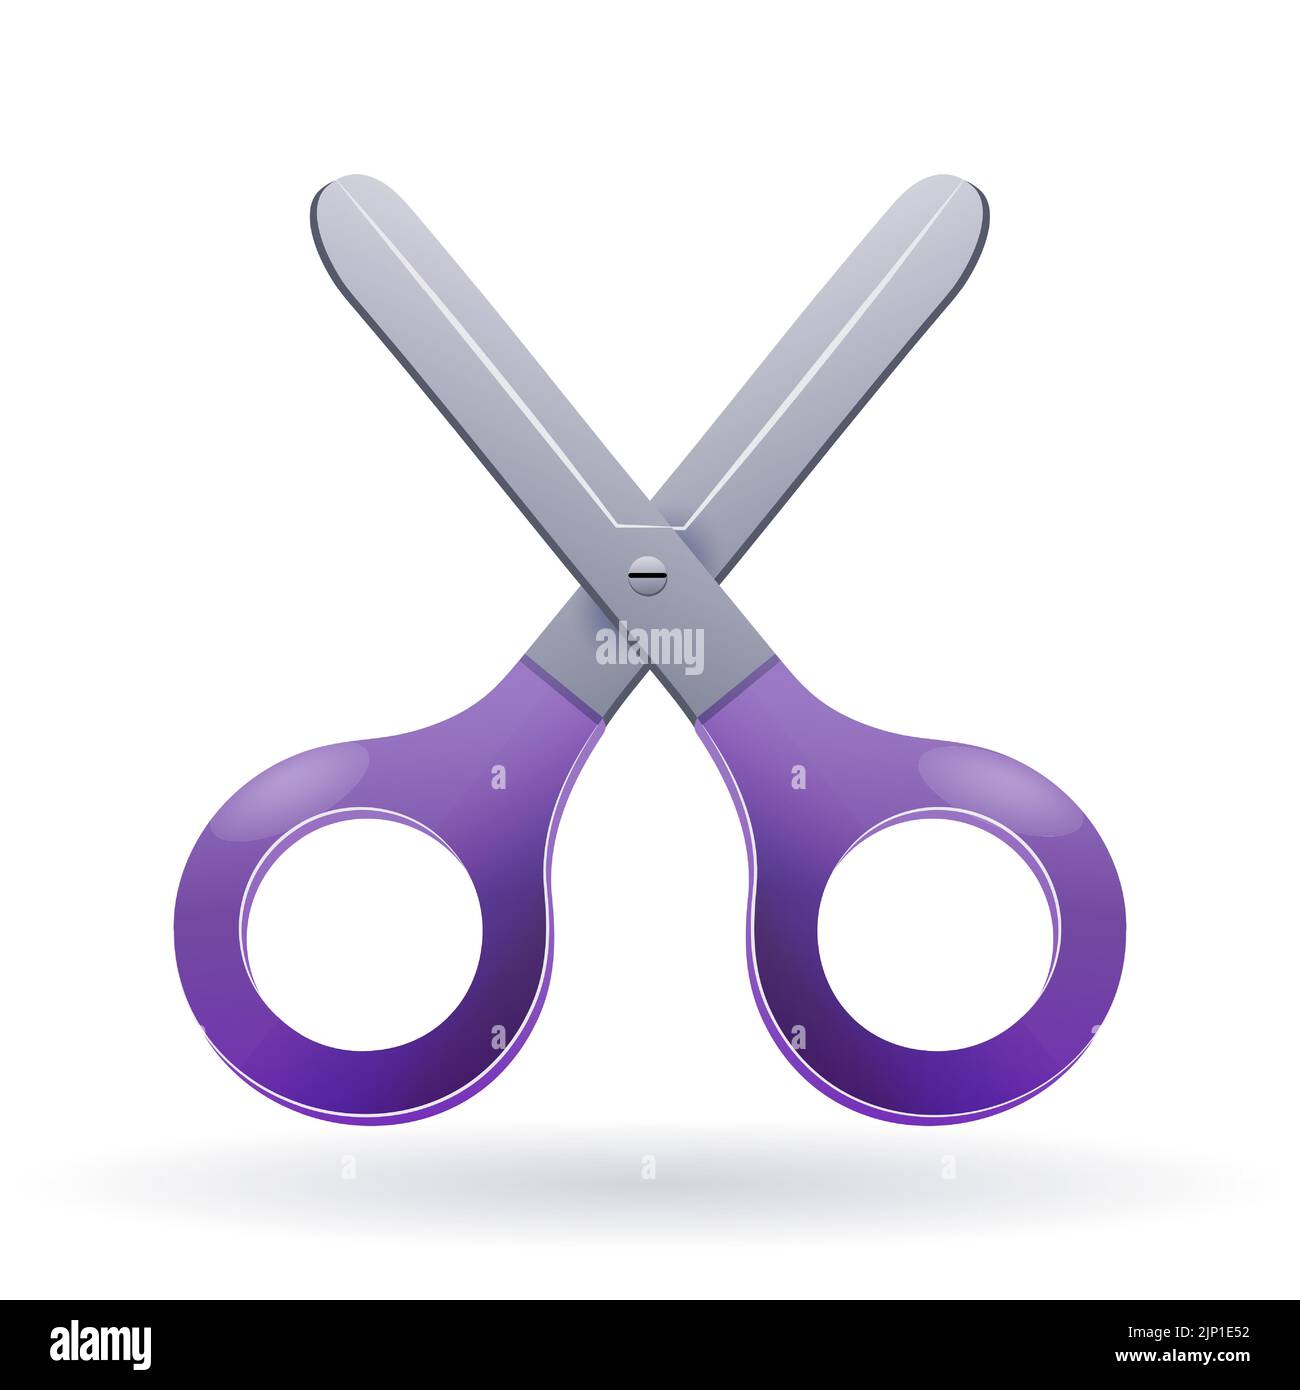 Stationery scissors with plastic handles isolated on white background. Cutting tool. Vector illustration. Stock Vector